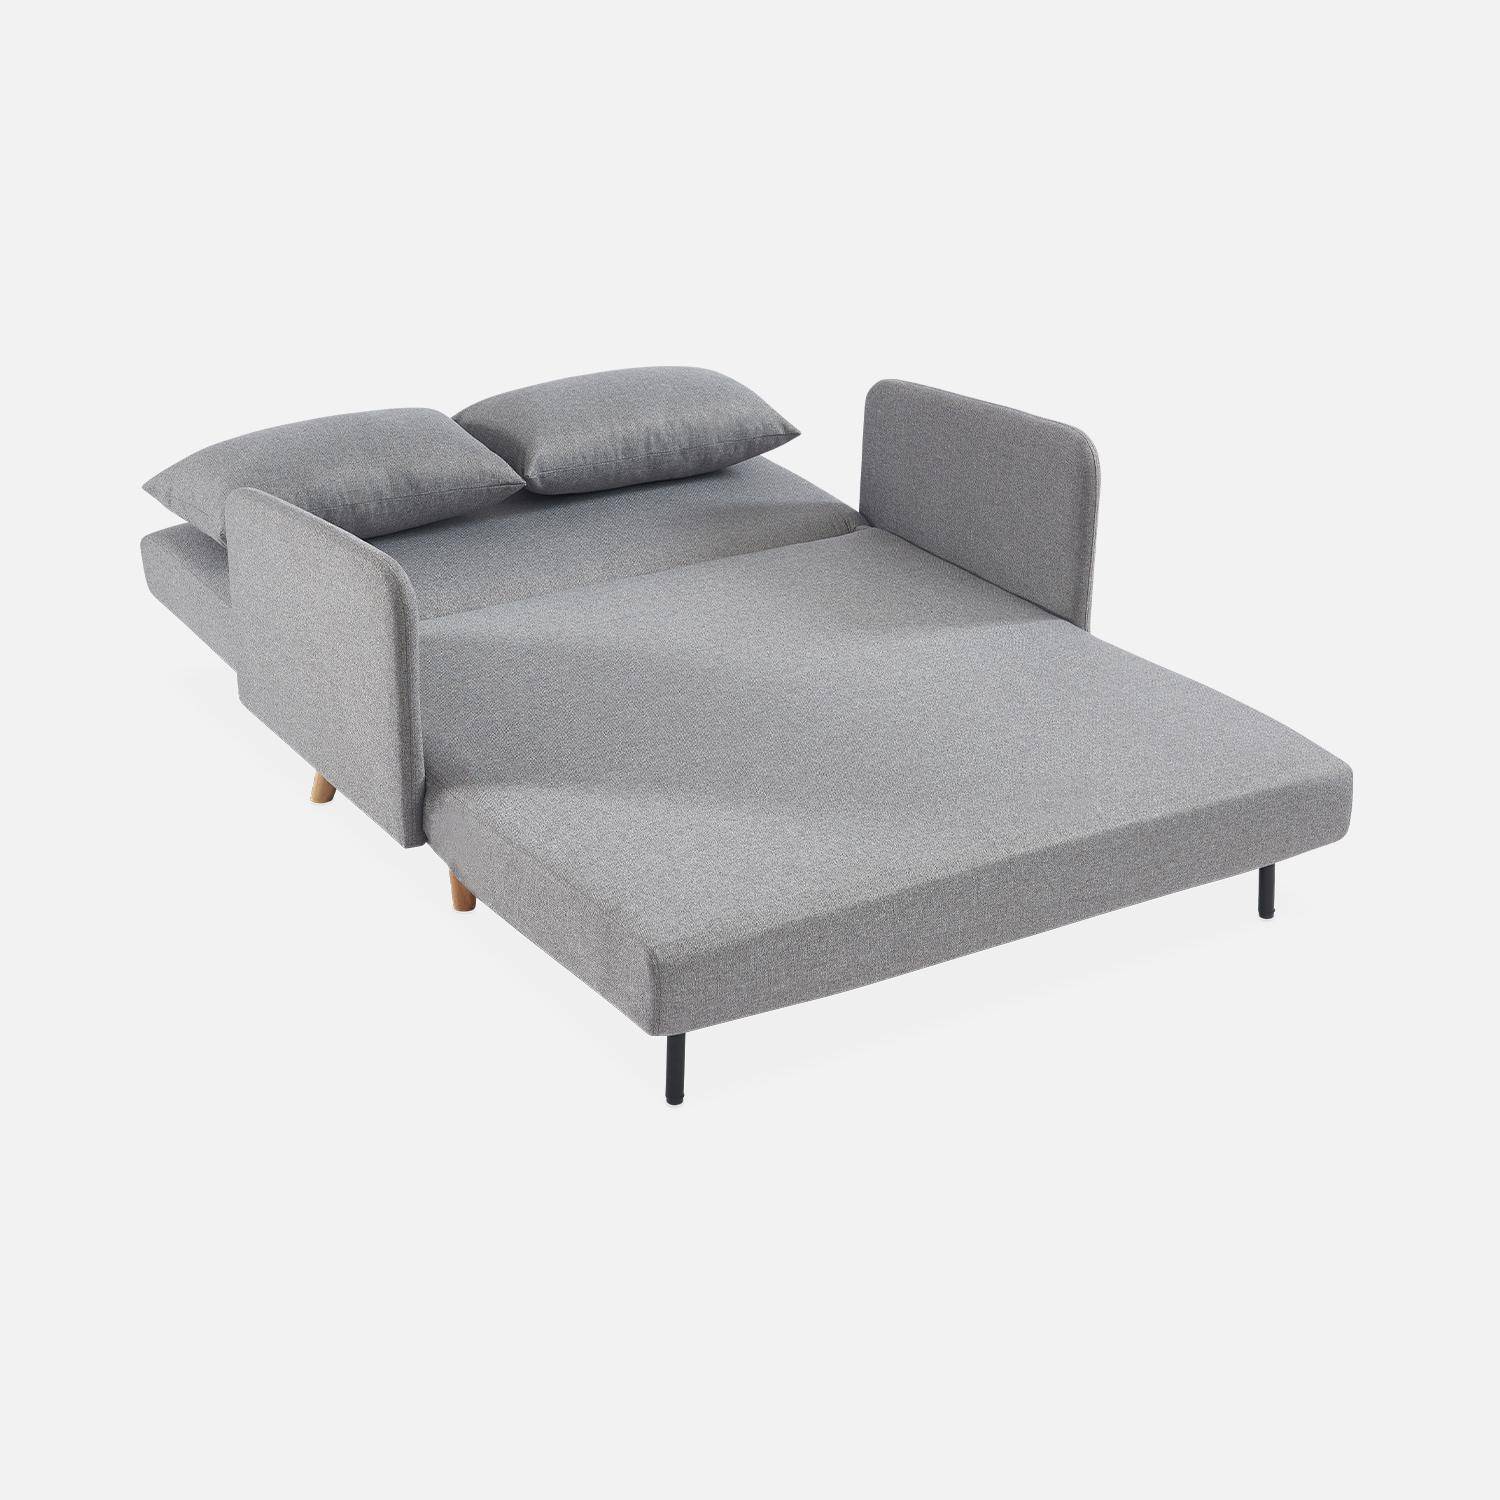 2-Seater convertible sofa with wooden legs, L130 x l81 x H82cm, grey Photo7